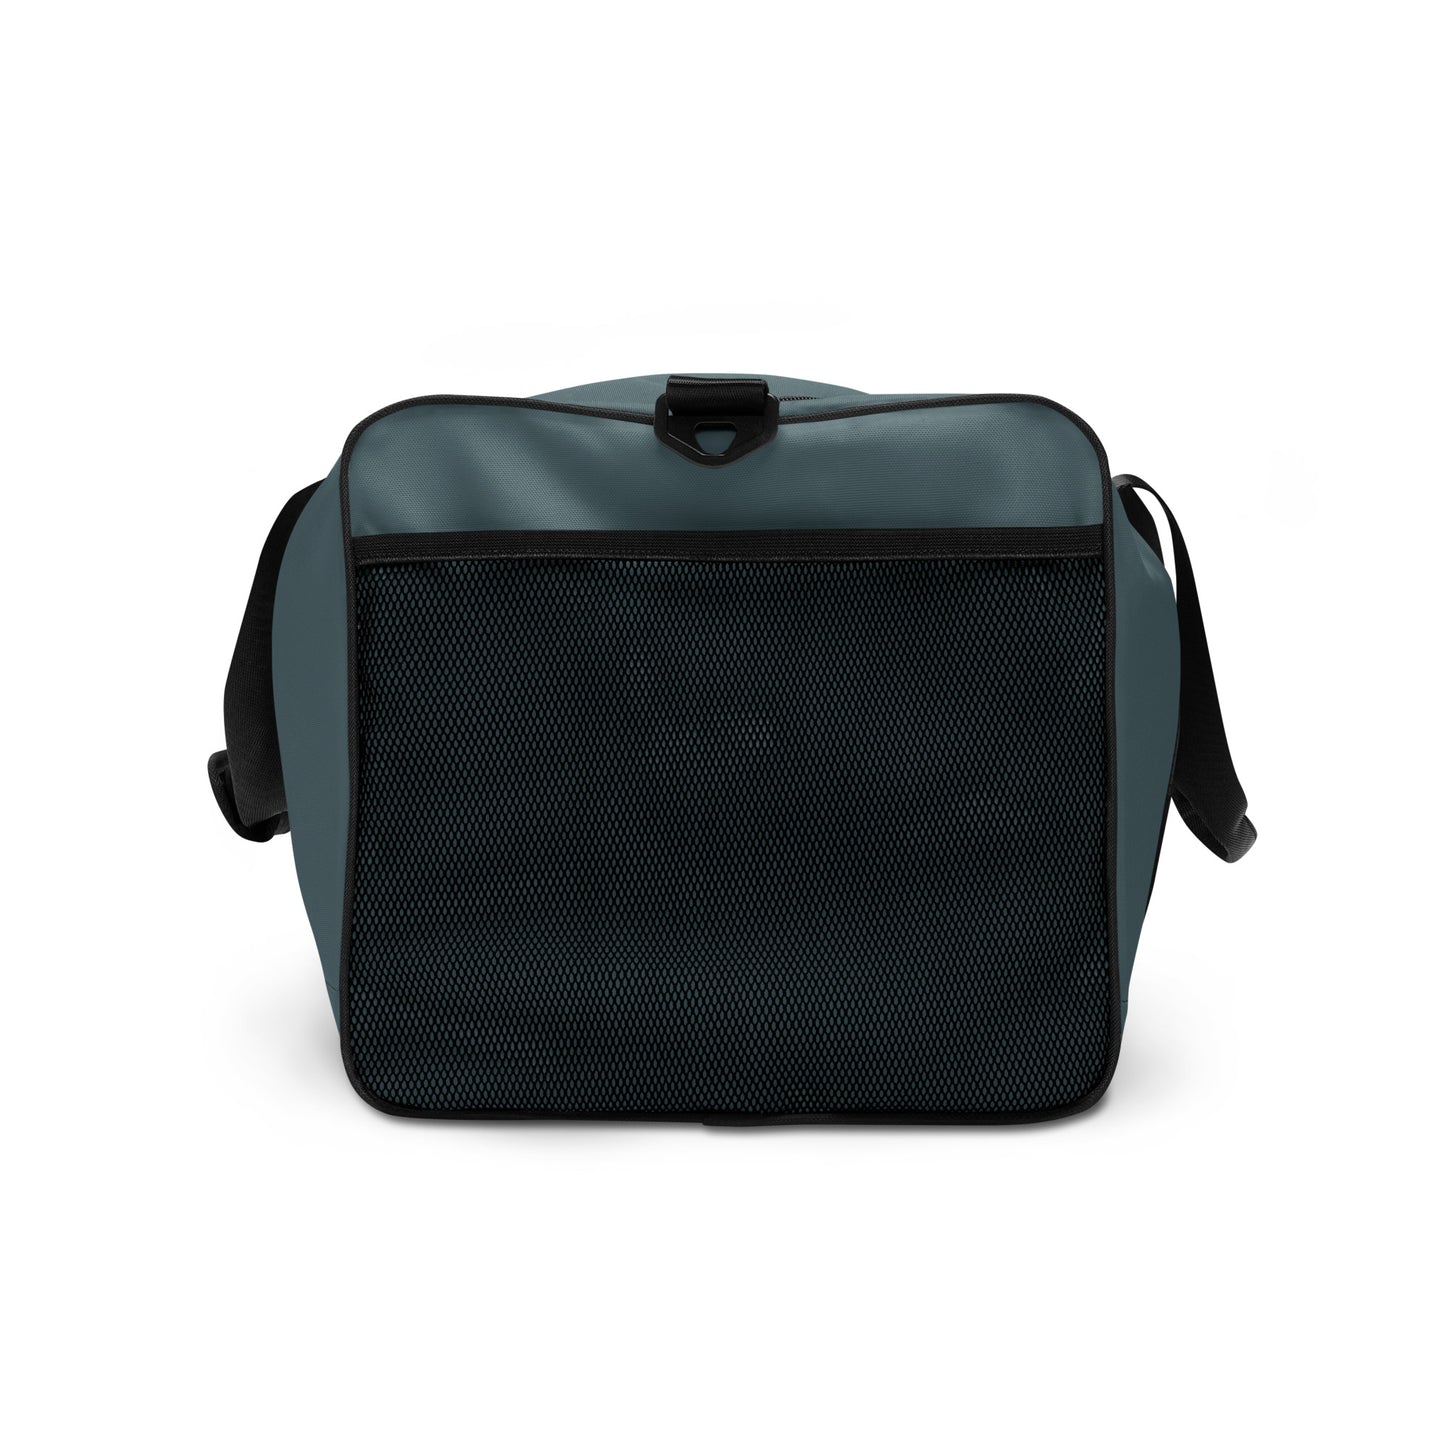 TIME OF VIBES - Travel Bag 23 (Gothic blue) - €99.00